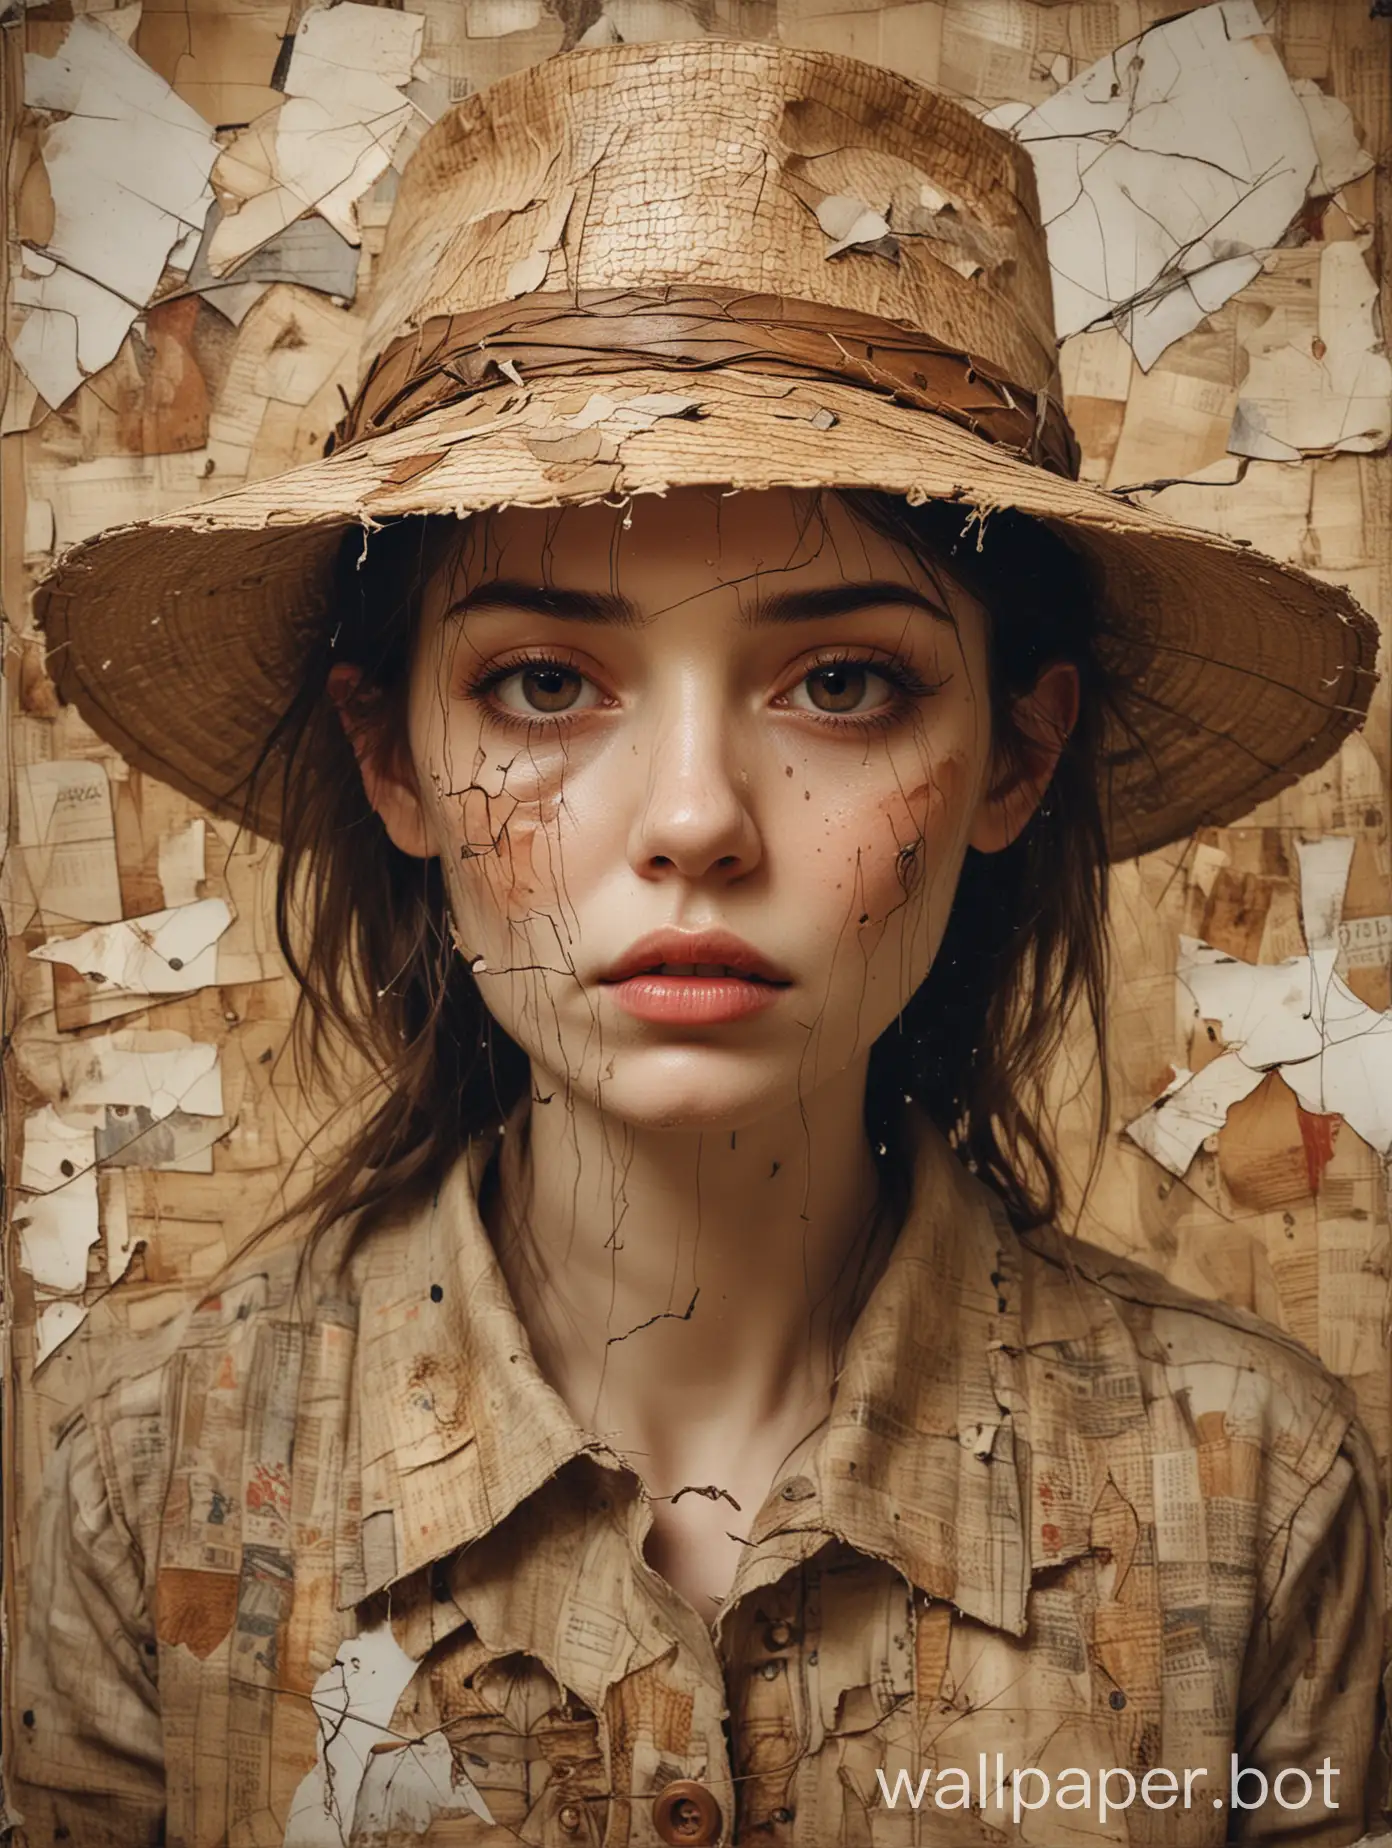 on a battered aged canvas with cracks and deep scratches, double exposure, collage in mixed media, patchwork, Anika HENSEN with exaggerated facial features in the style of Mark Ryden, clean skin, in a straw hat and matching clothes, brown eyes with a sharp look, detailed textures, artistic dynamic pose, grace, atmosphere, clear focus, image clarity, 4K, transparency, surreal oil painting, splashes of paint combined with carefully drawn fine lines and details in the style of Ralph Steadman, ArtStation